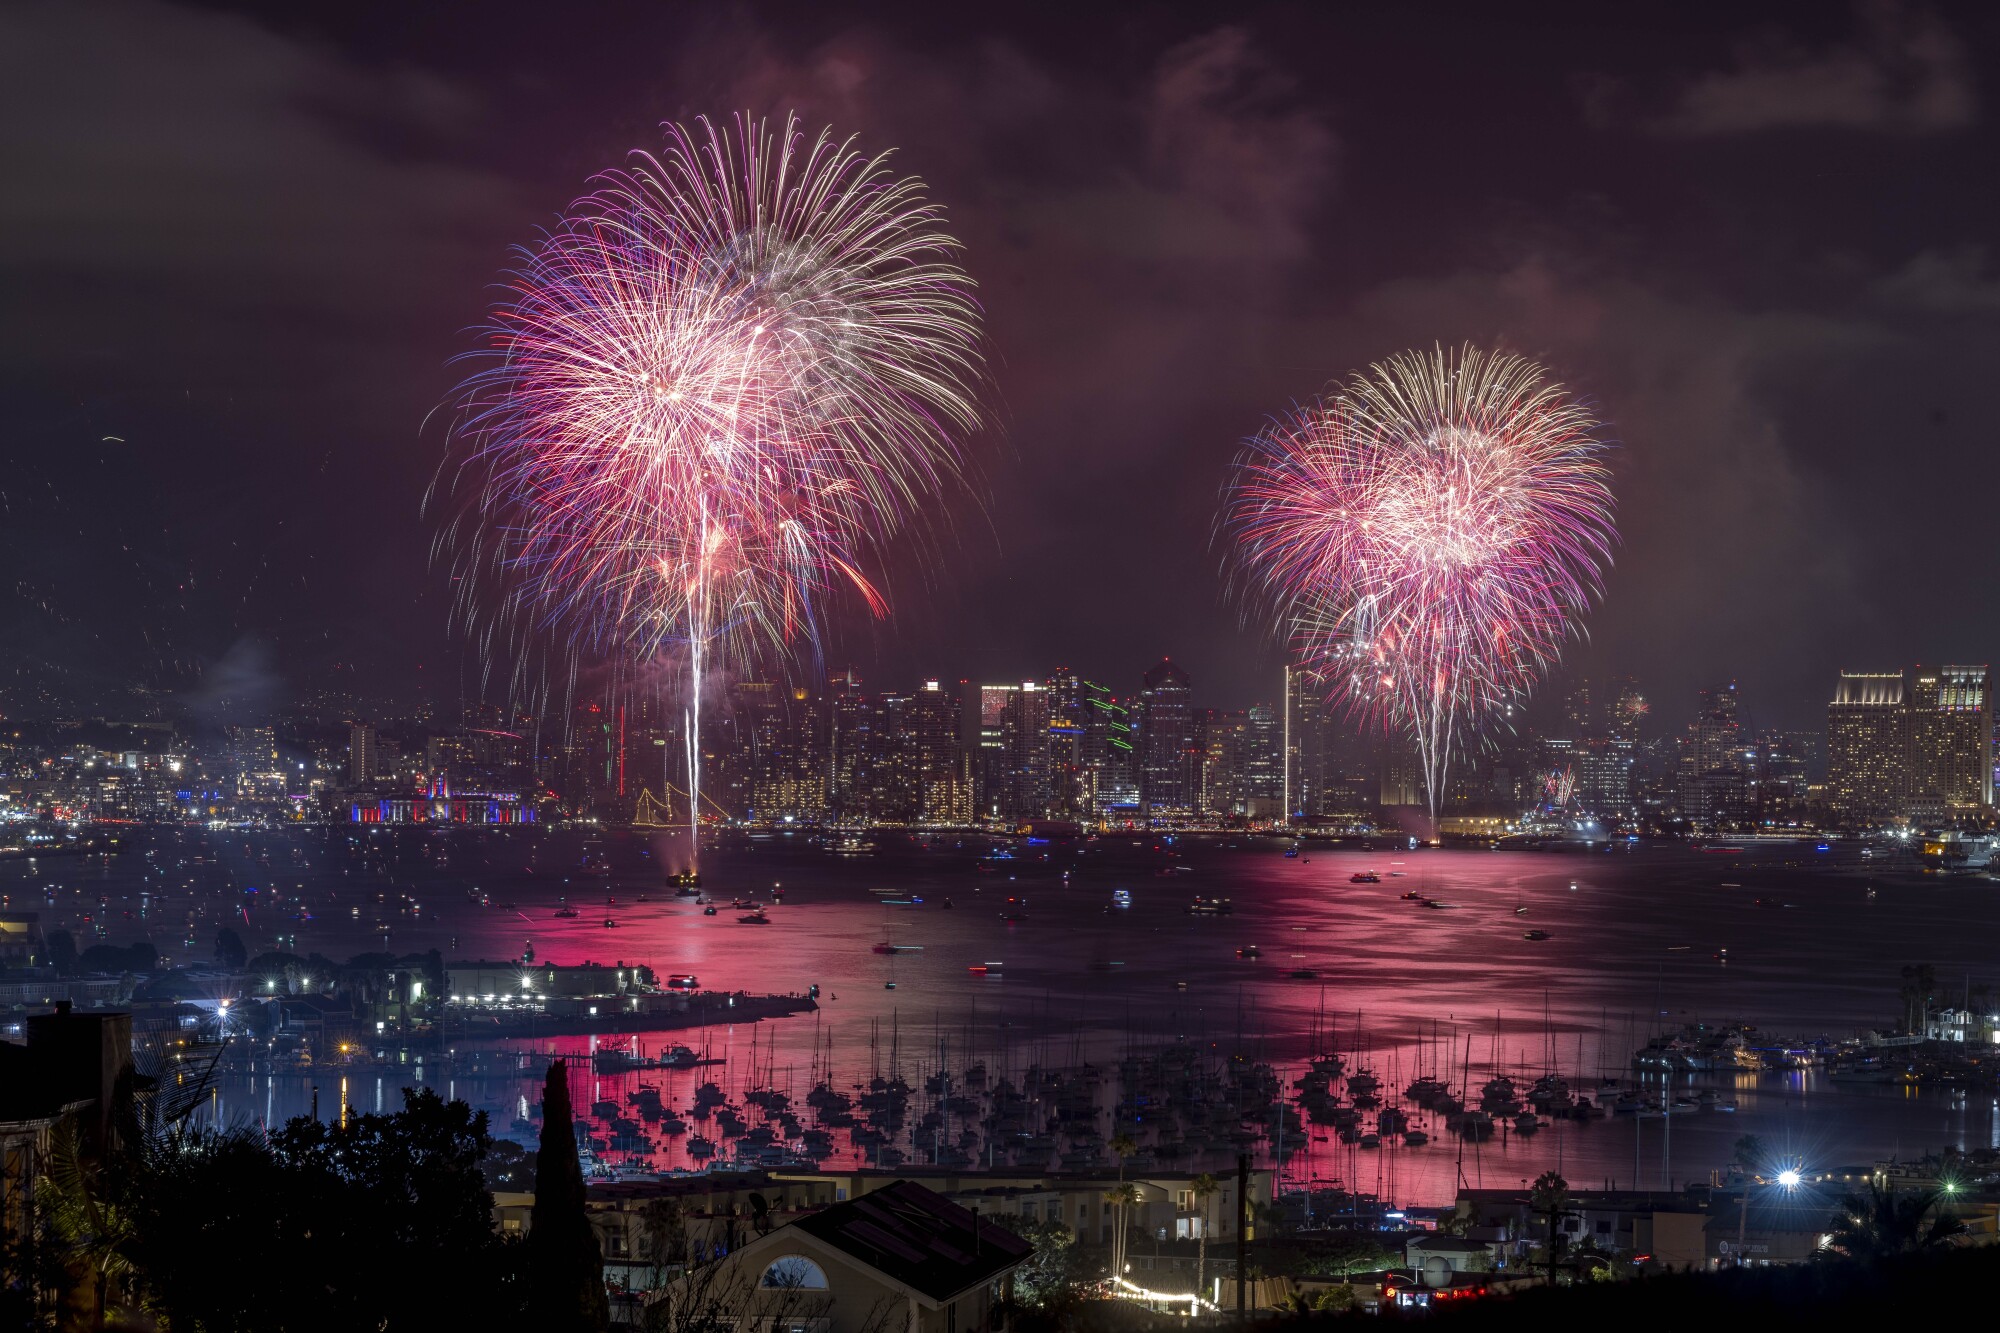 Fireworks explode over San Diego Bay during the Big Bay Boom fireworks show in celebration of Independence Day.